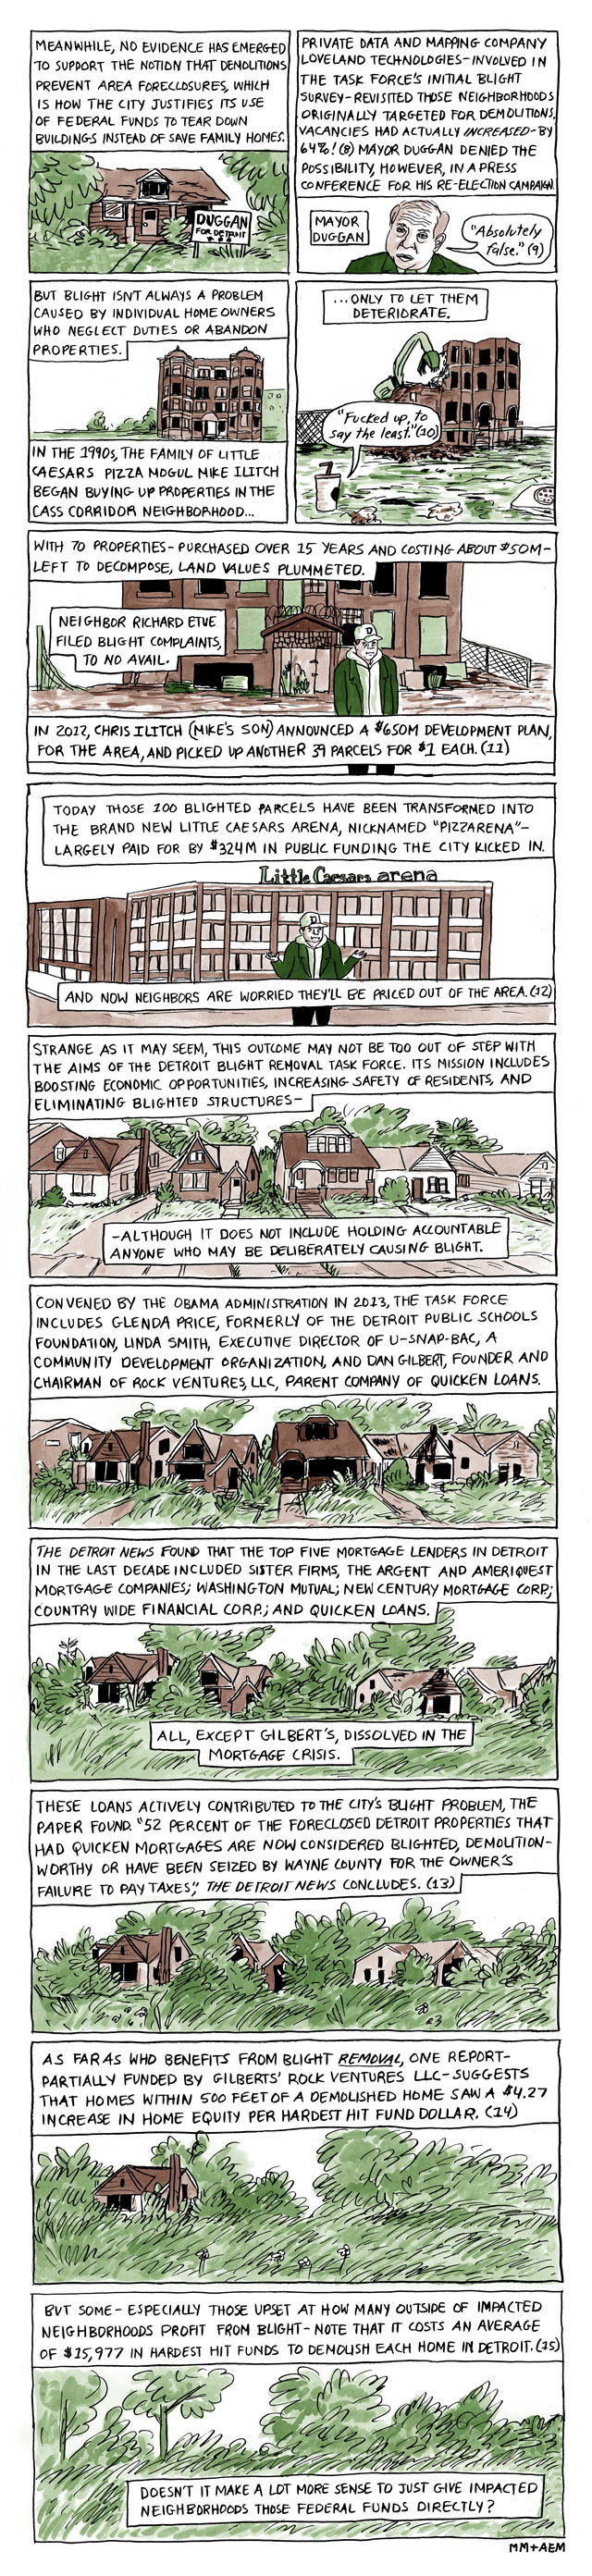 How Blight Is Used to Justify Housing Demolition in Detroit